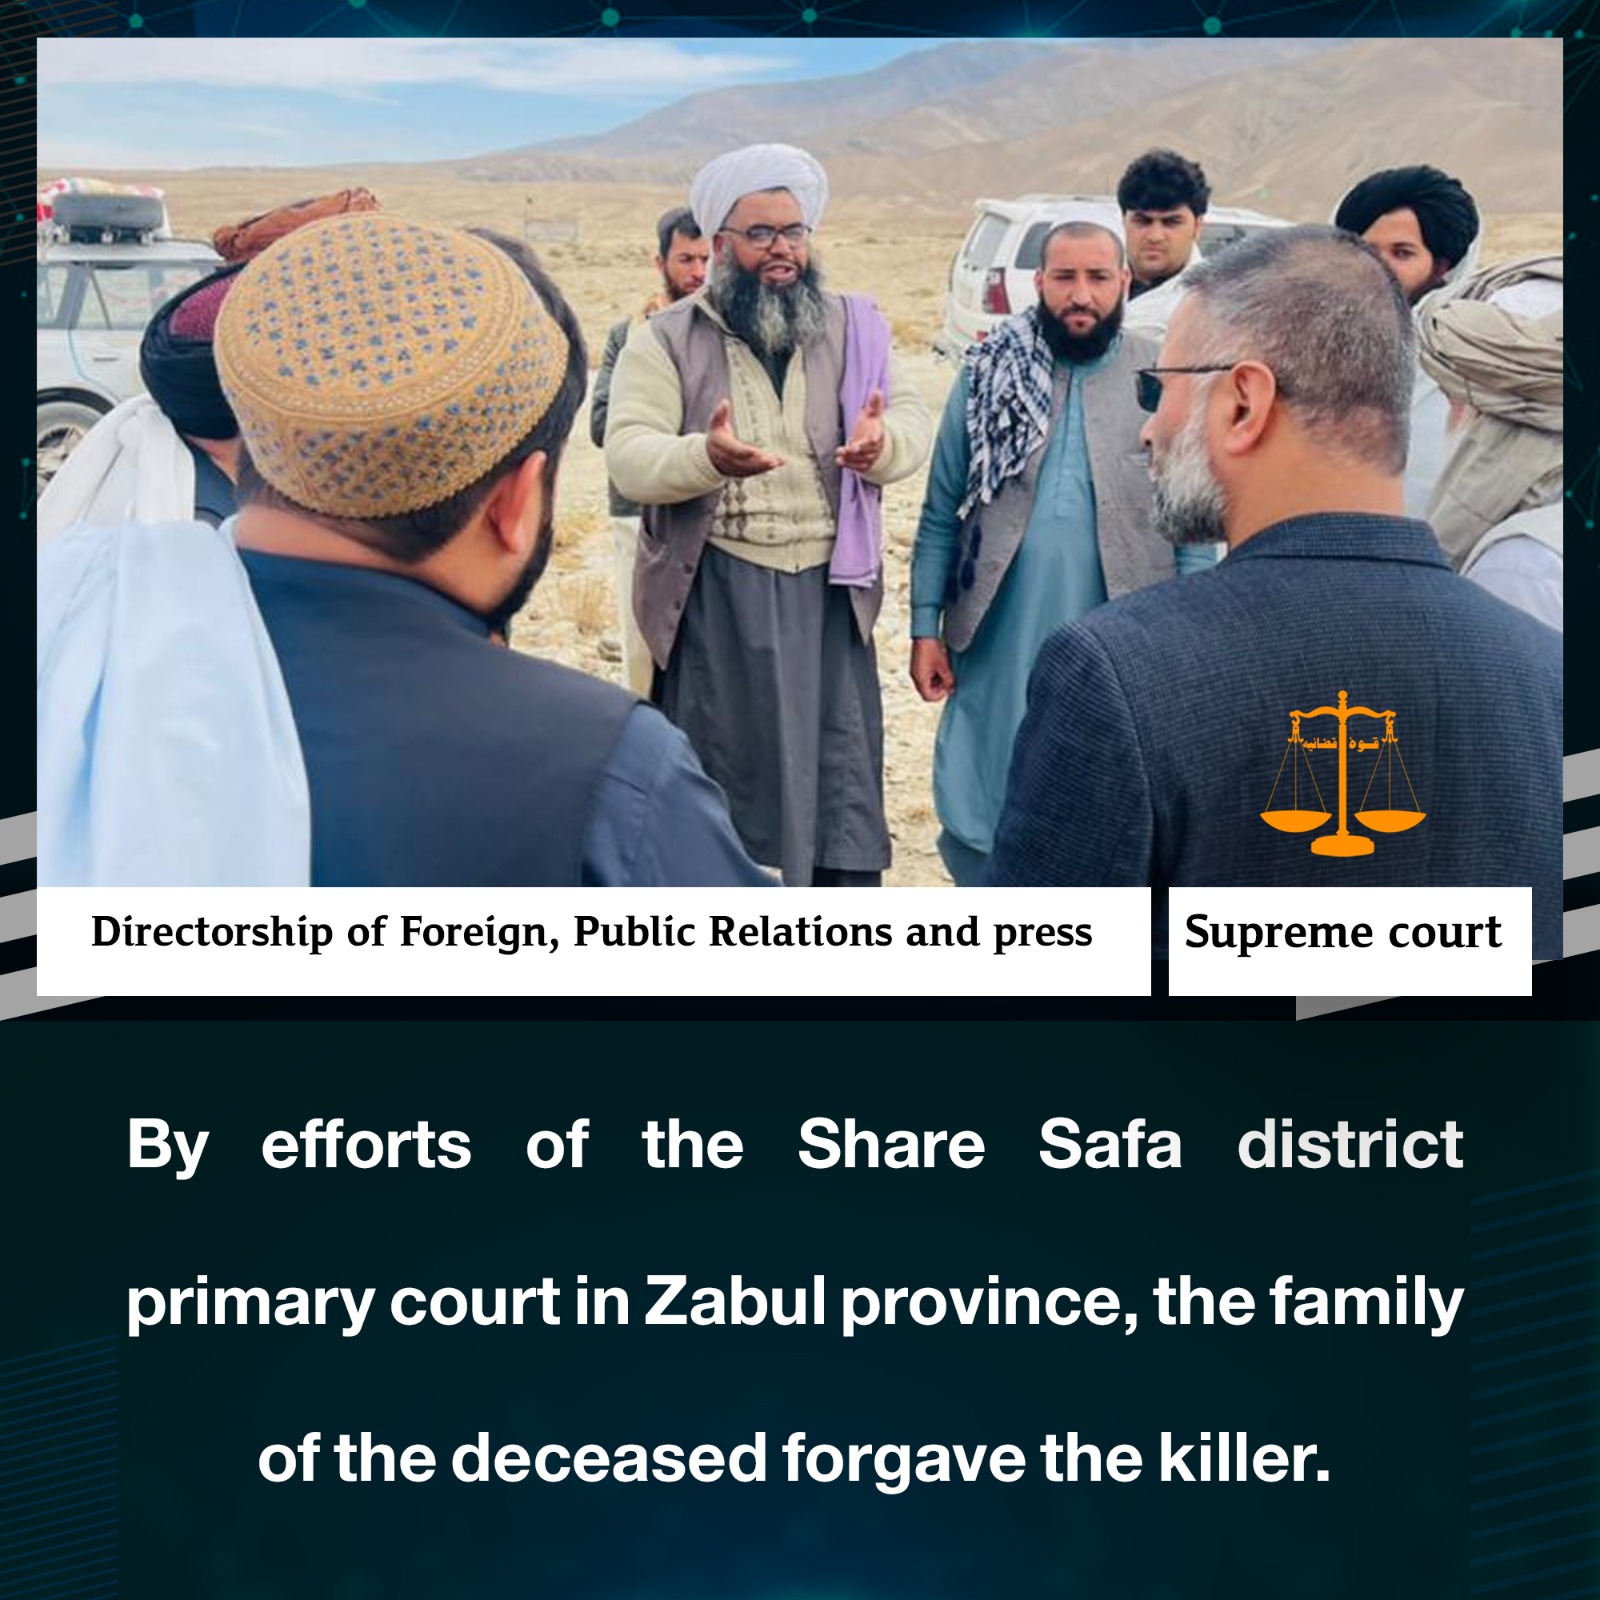 By efforts of the Share Safa district primary court in Zabul province, the family of the deceased forgave the killer